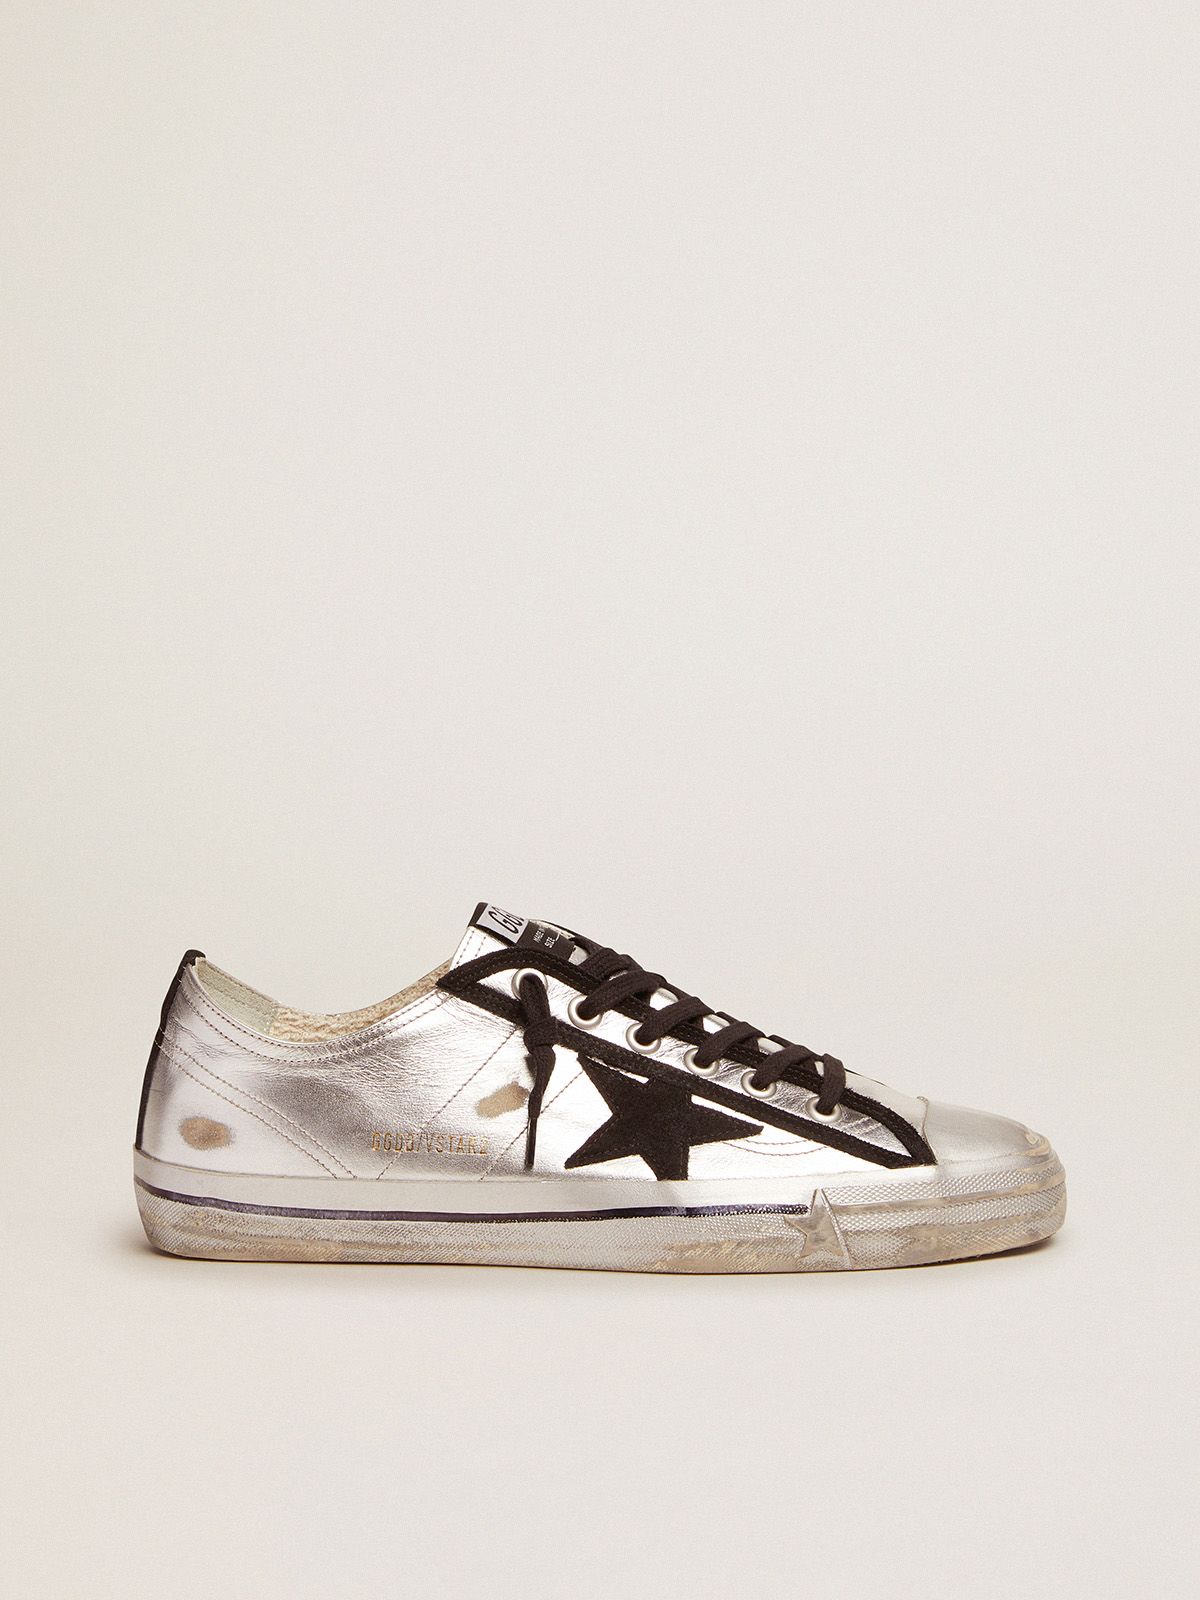 V-Star sneakers in silver laminated leather with black suede details